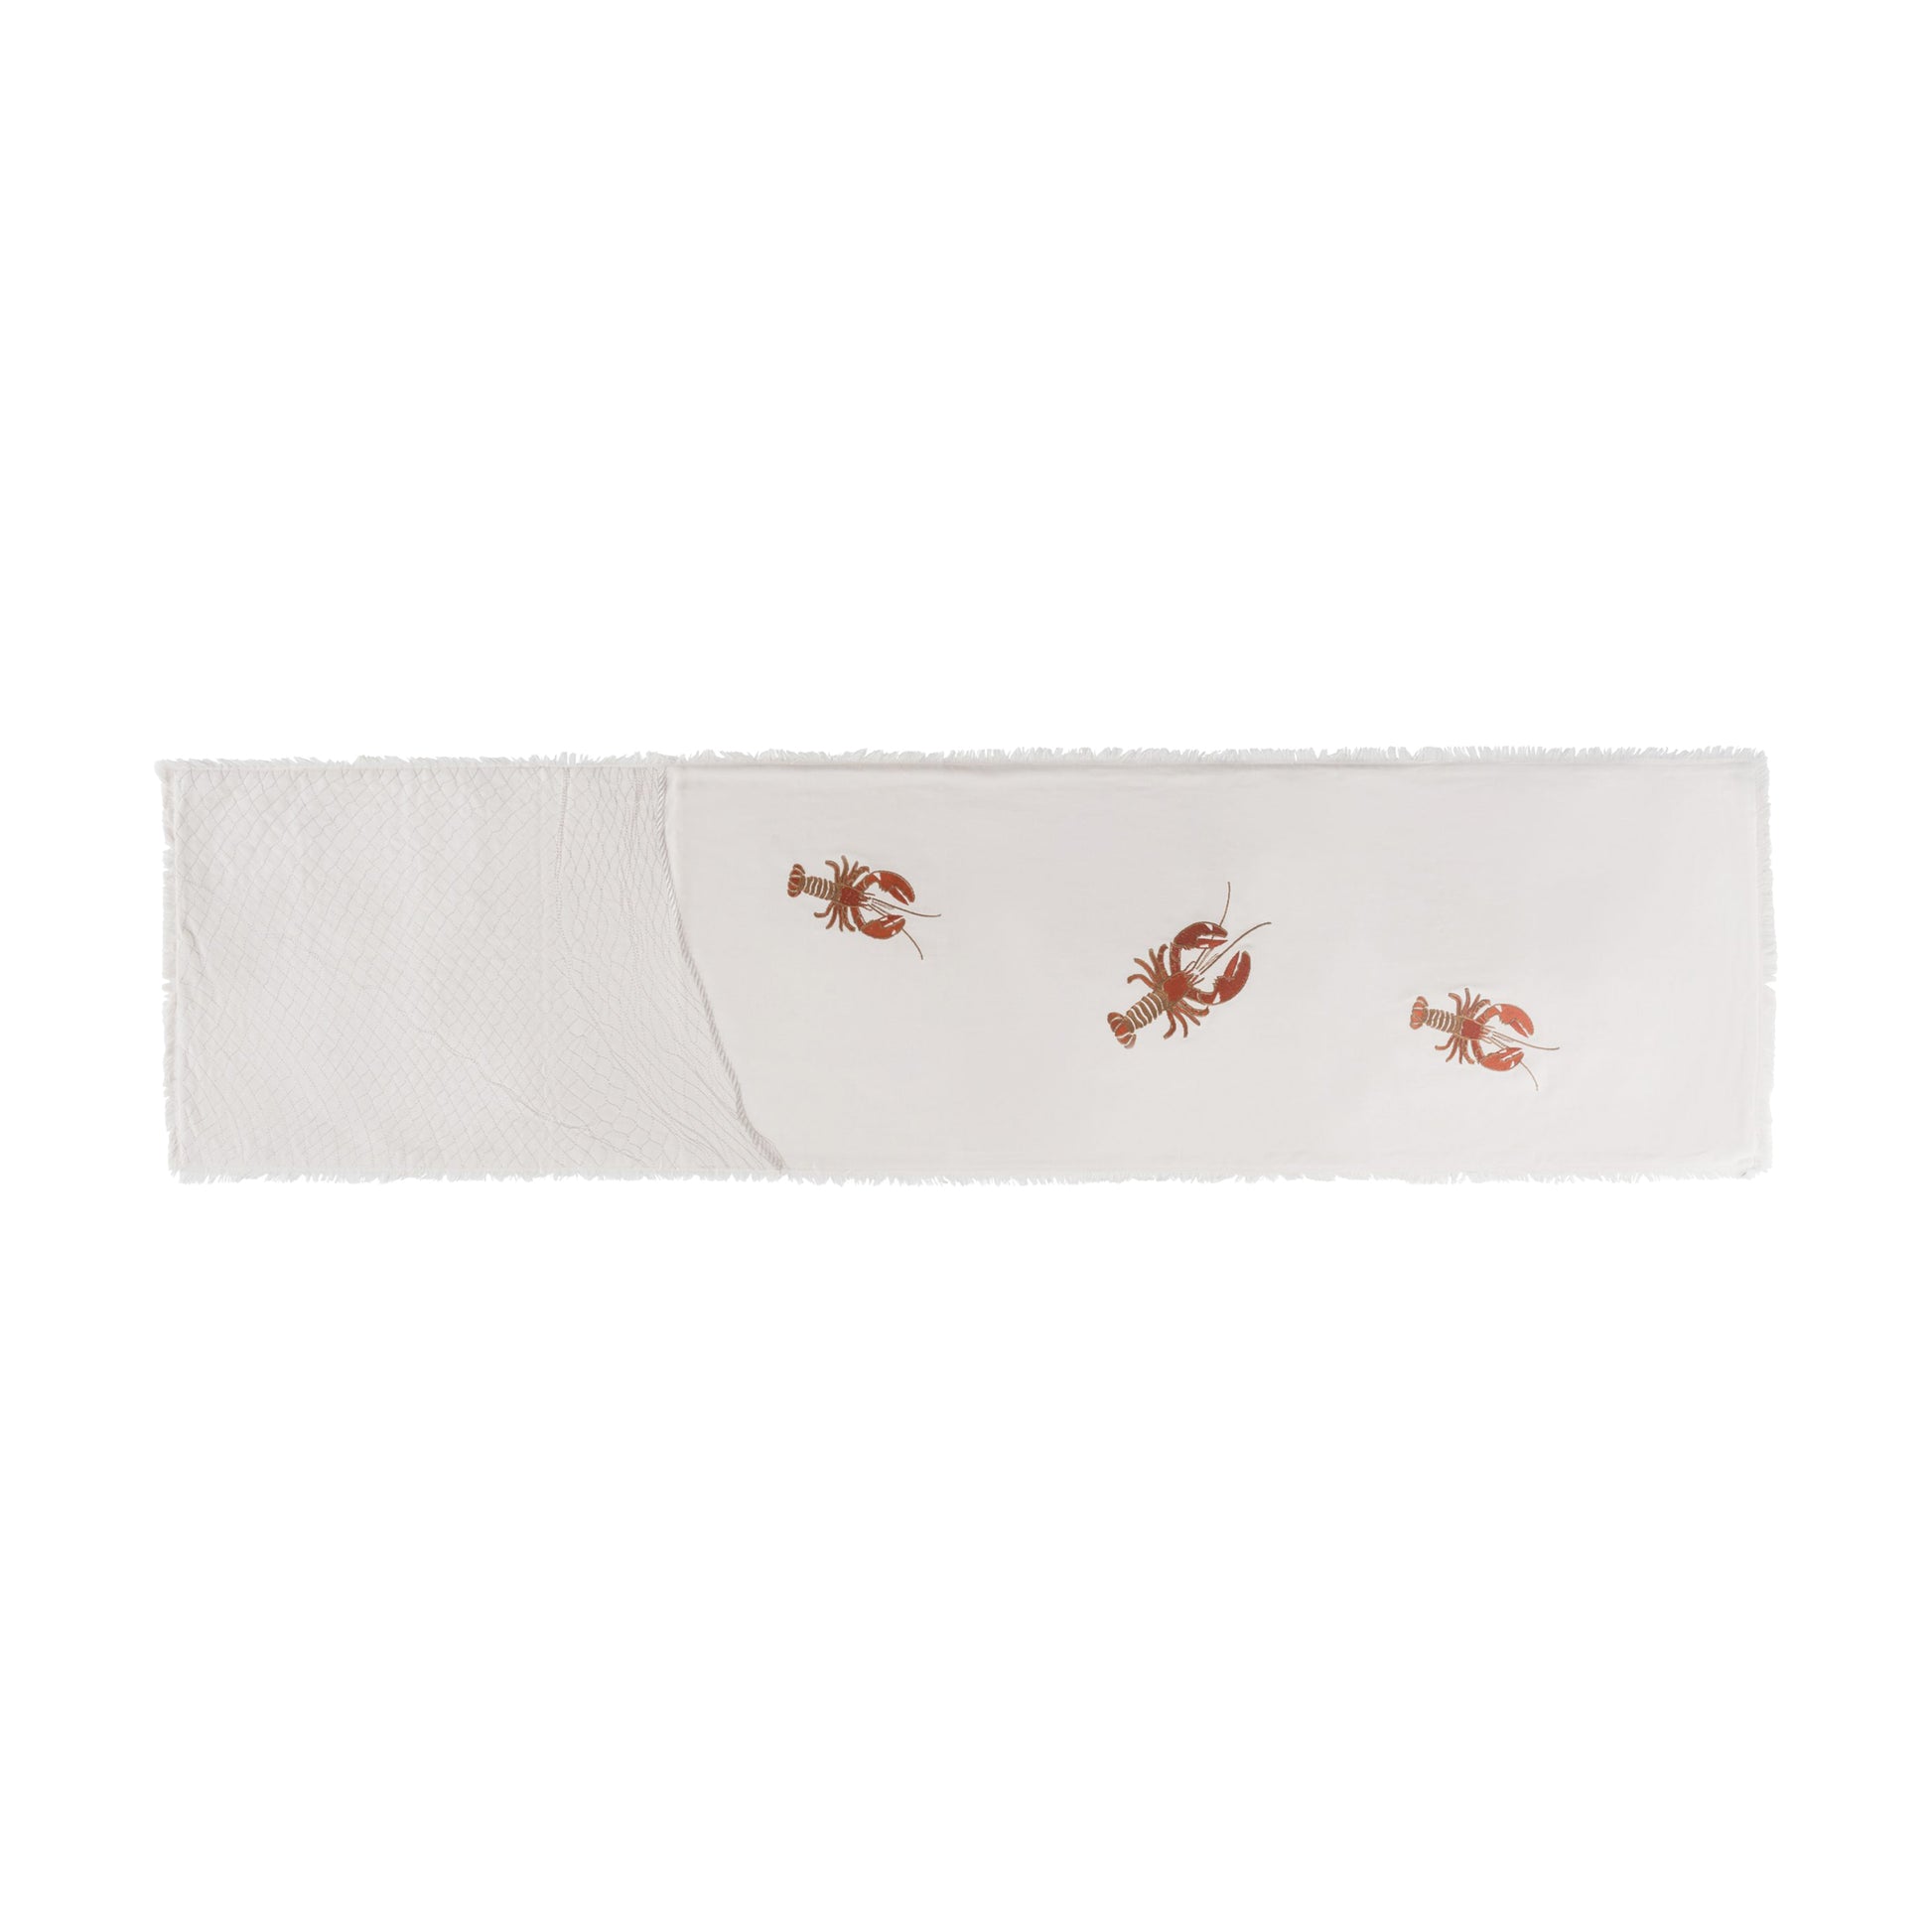 Natural fringed cotton table runner featuring embroidered red lobster and fishing net.